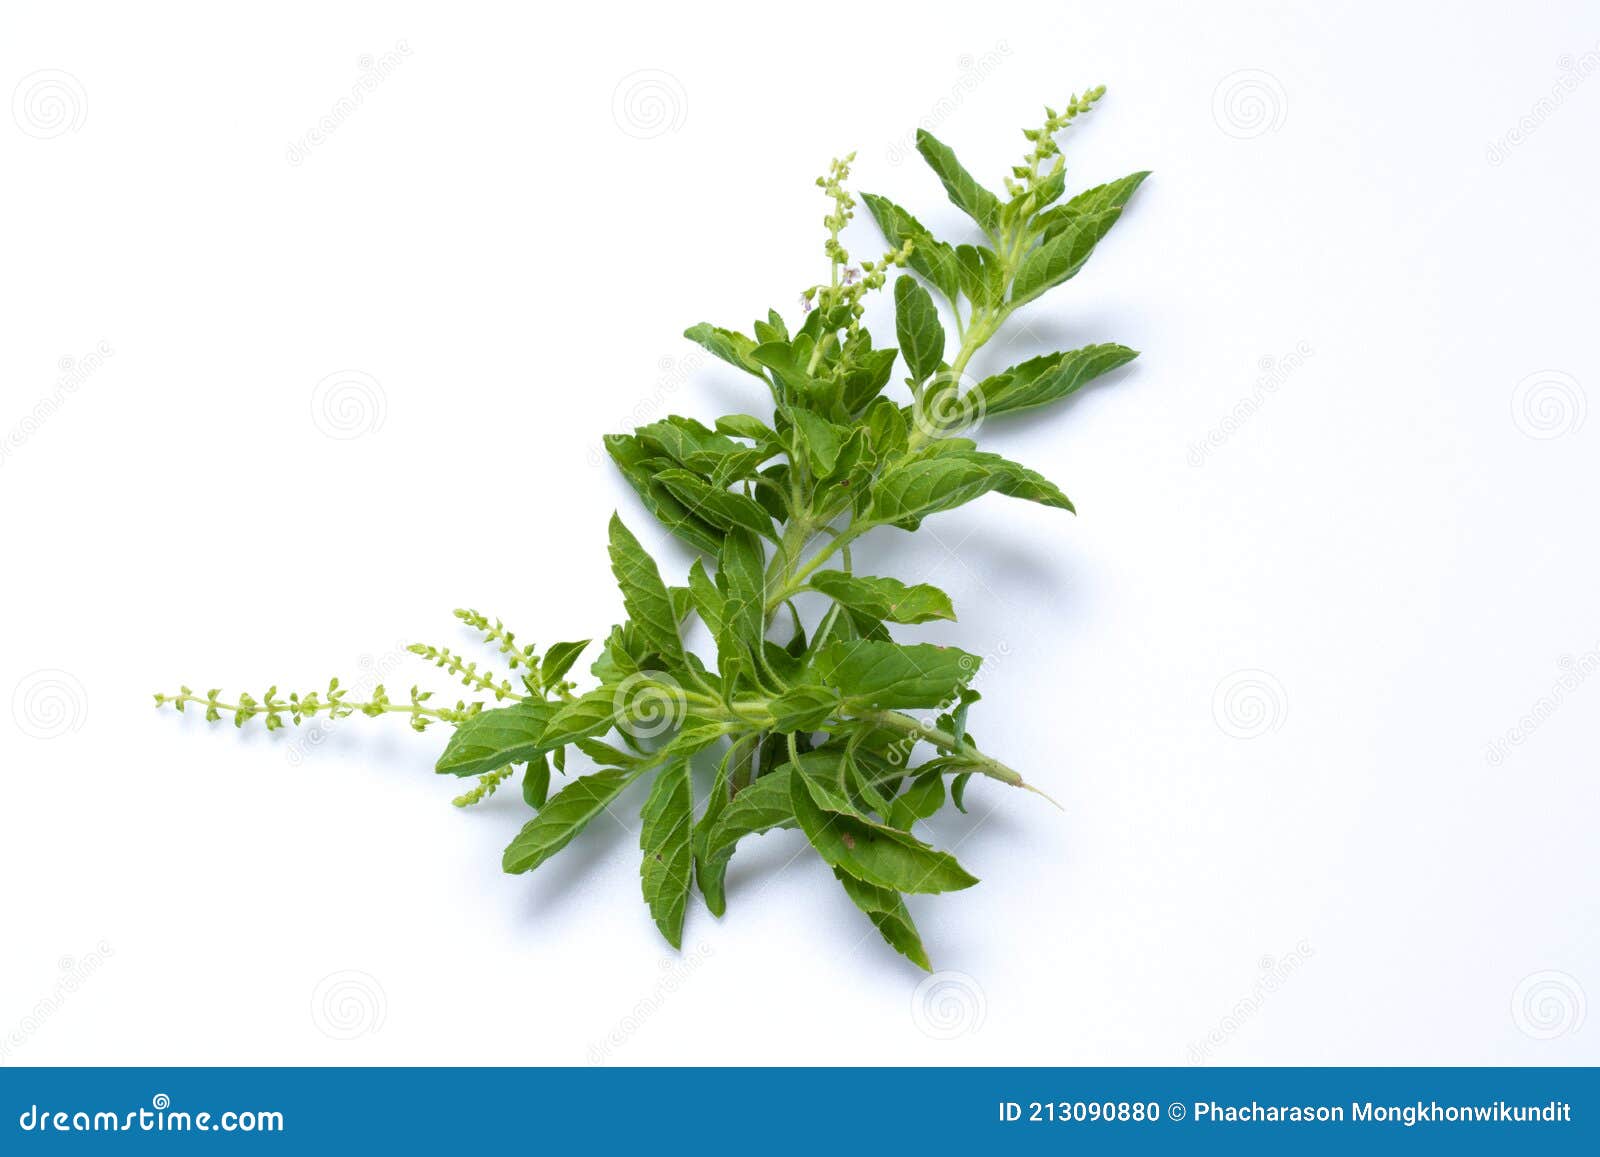 basil leaves on a white background